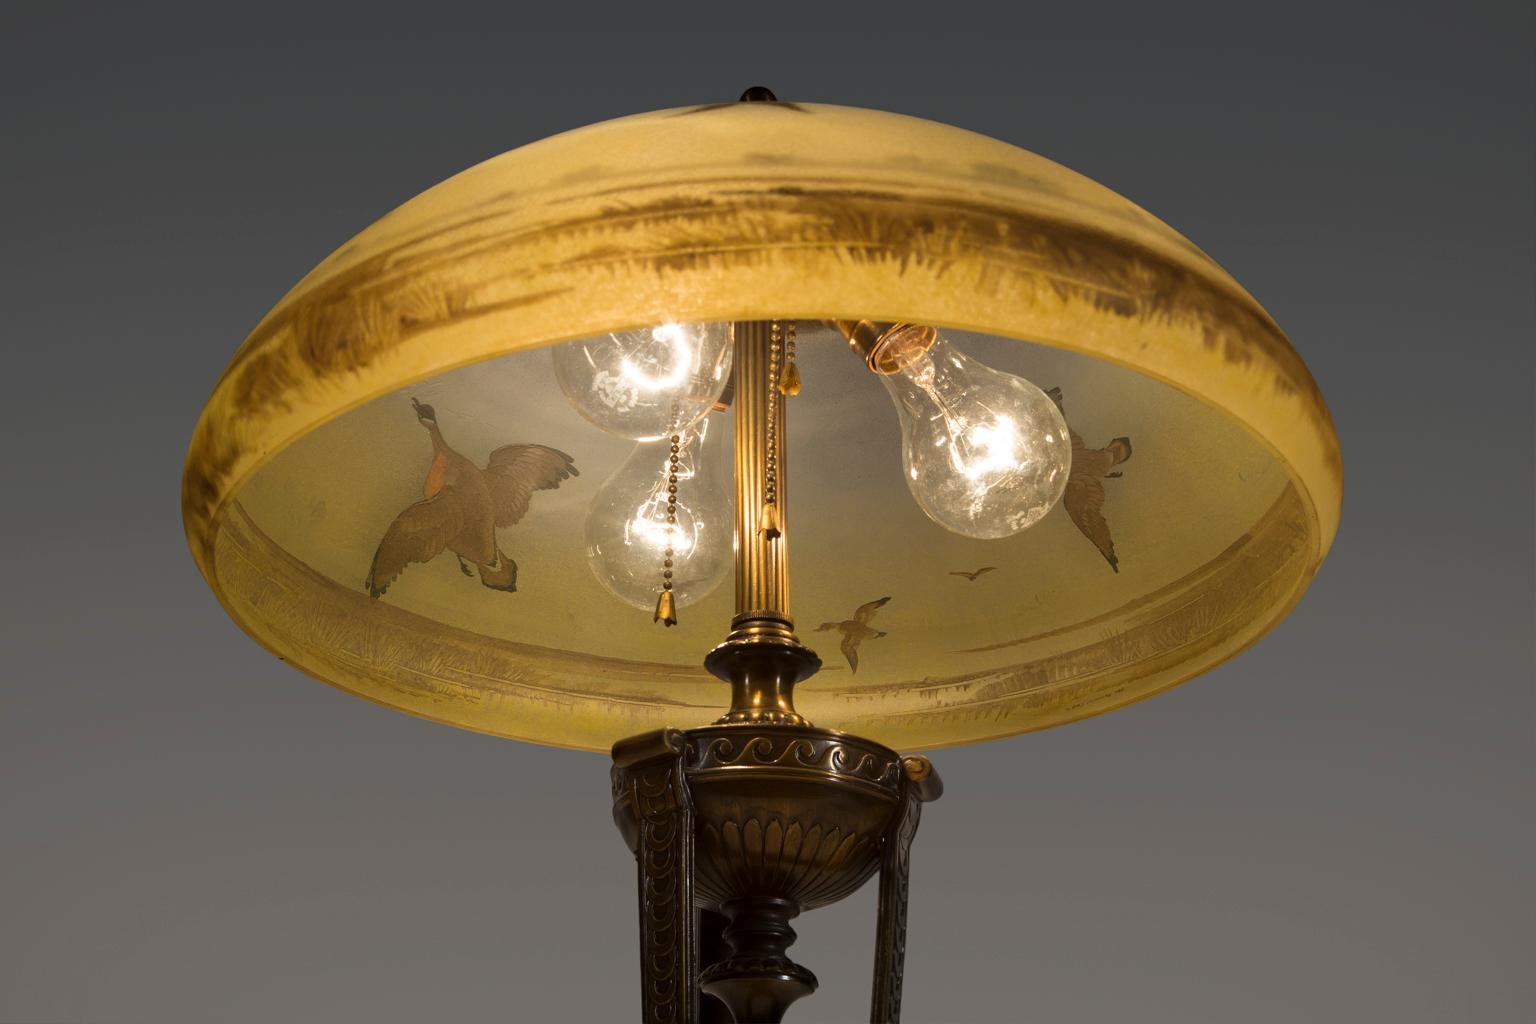 This is a beautiful brass and glass lamp with a flock of geese in flight over a water landscape. Shading of sky has the soft blue and golden color of an evening sunset. 

Pairpoint is known for three kinds of glass lampshades, originally produced